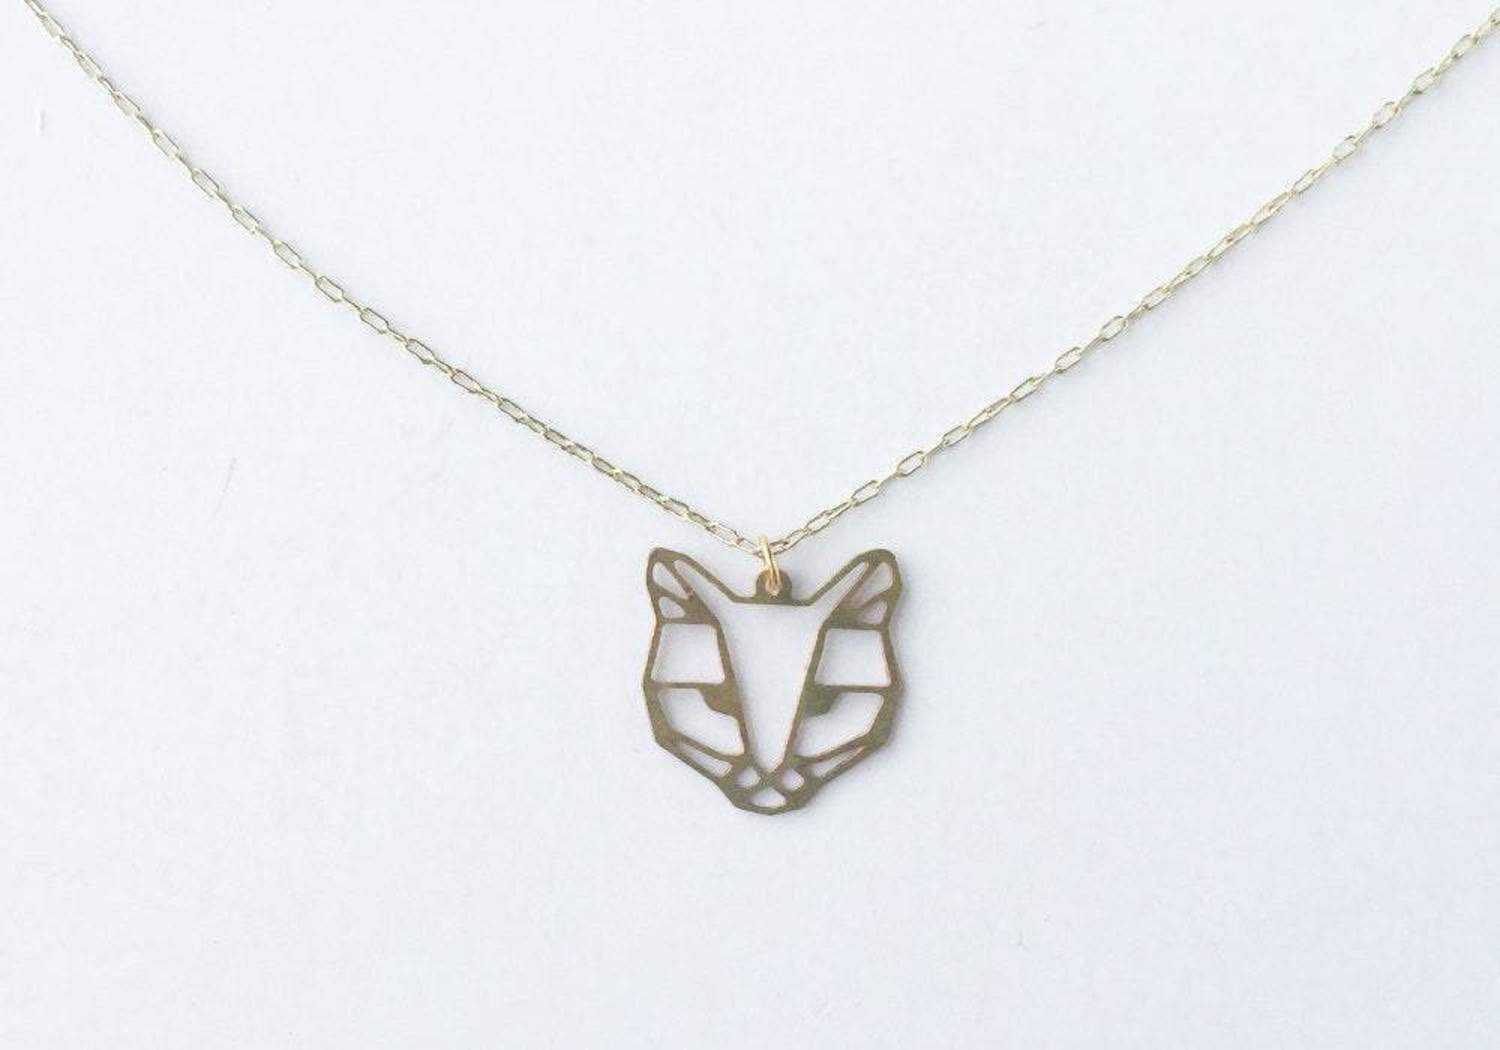 A Tea Leaf - Necklace - Cat Face - Silver Plated